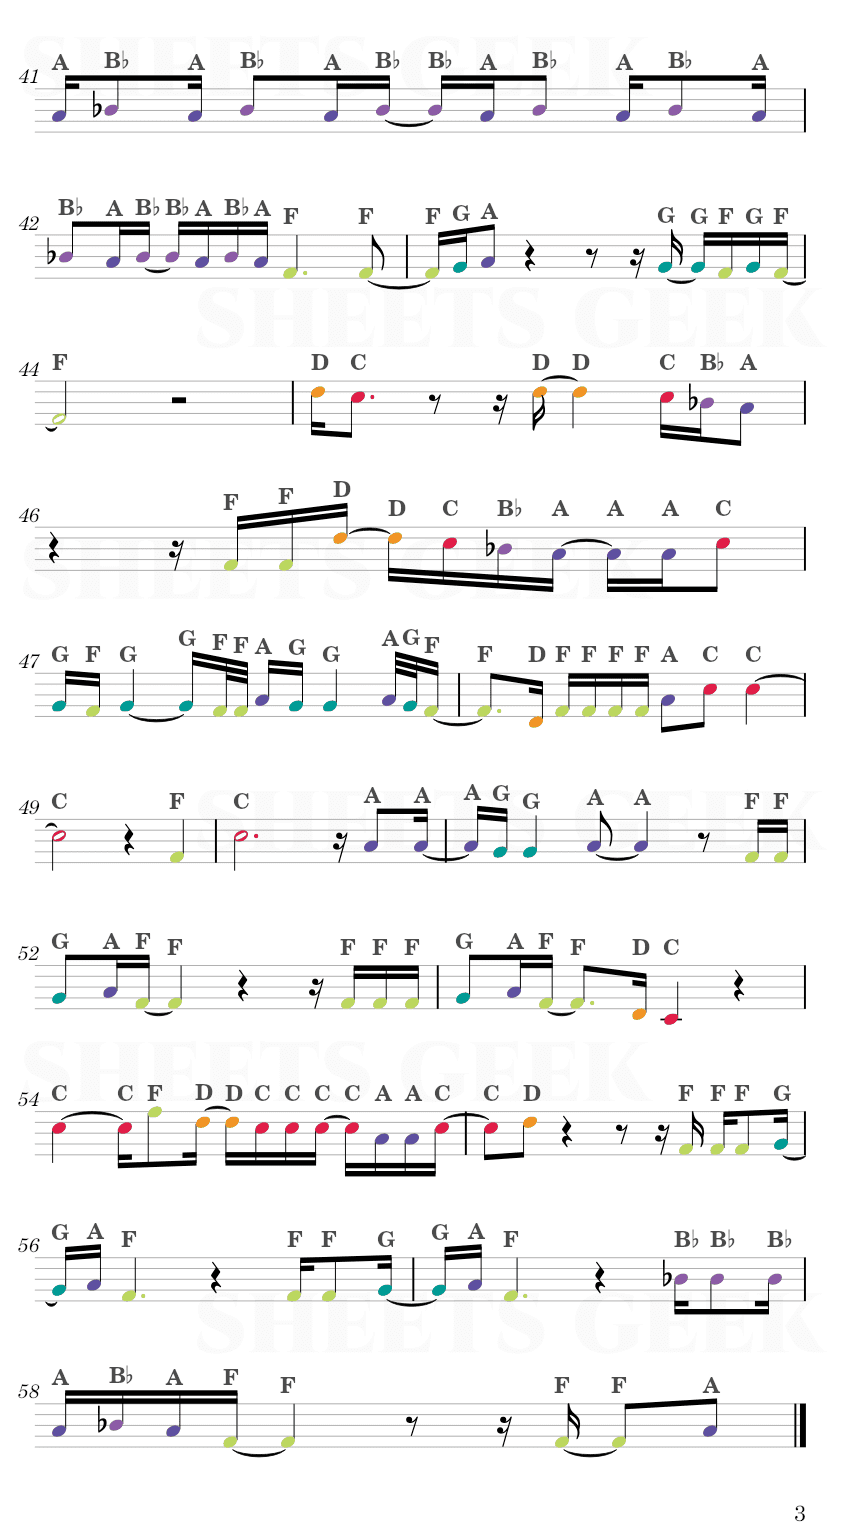 Easy On Me - Adele Easy Sheet Music Free for piano, keyboard, flute, violin, sax, cello page 3